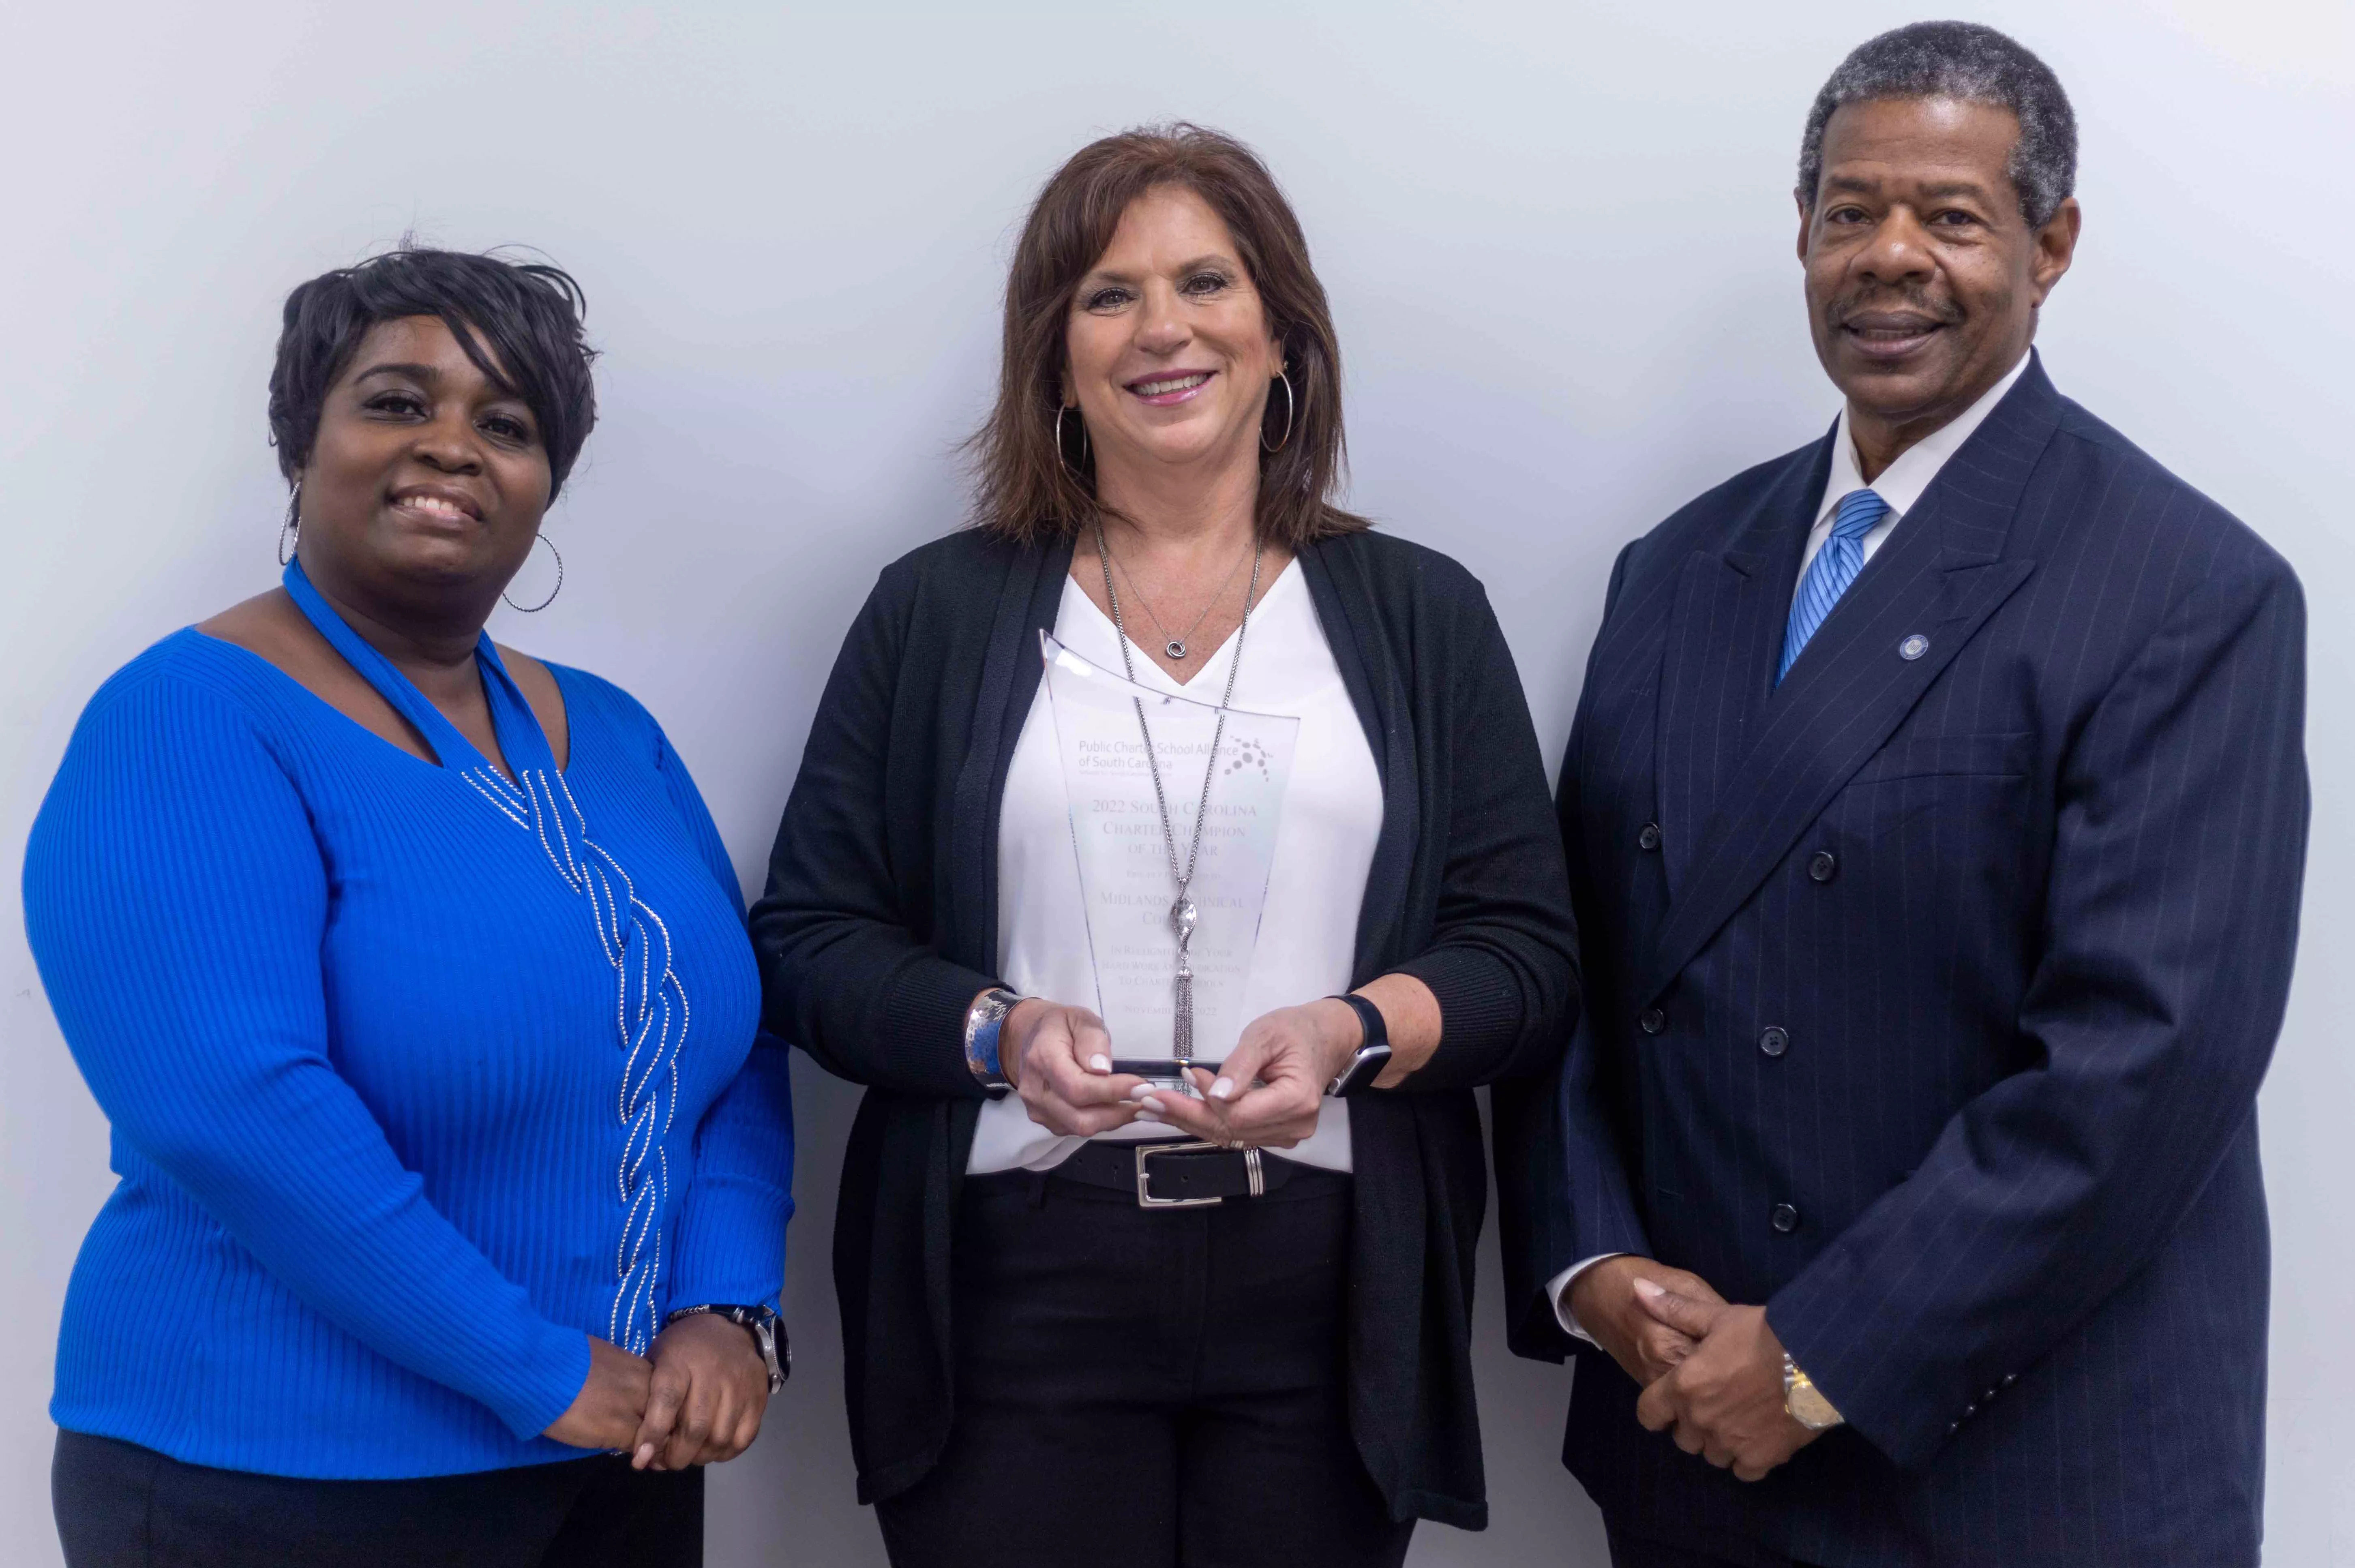 Principals Dr. Carla Brabham (Richland One) and Dr. Laurie Lee (Midlands Middle College) with MTC President Dr. Ron Rhames